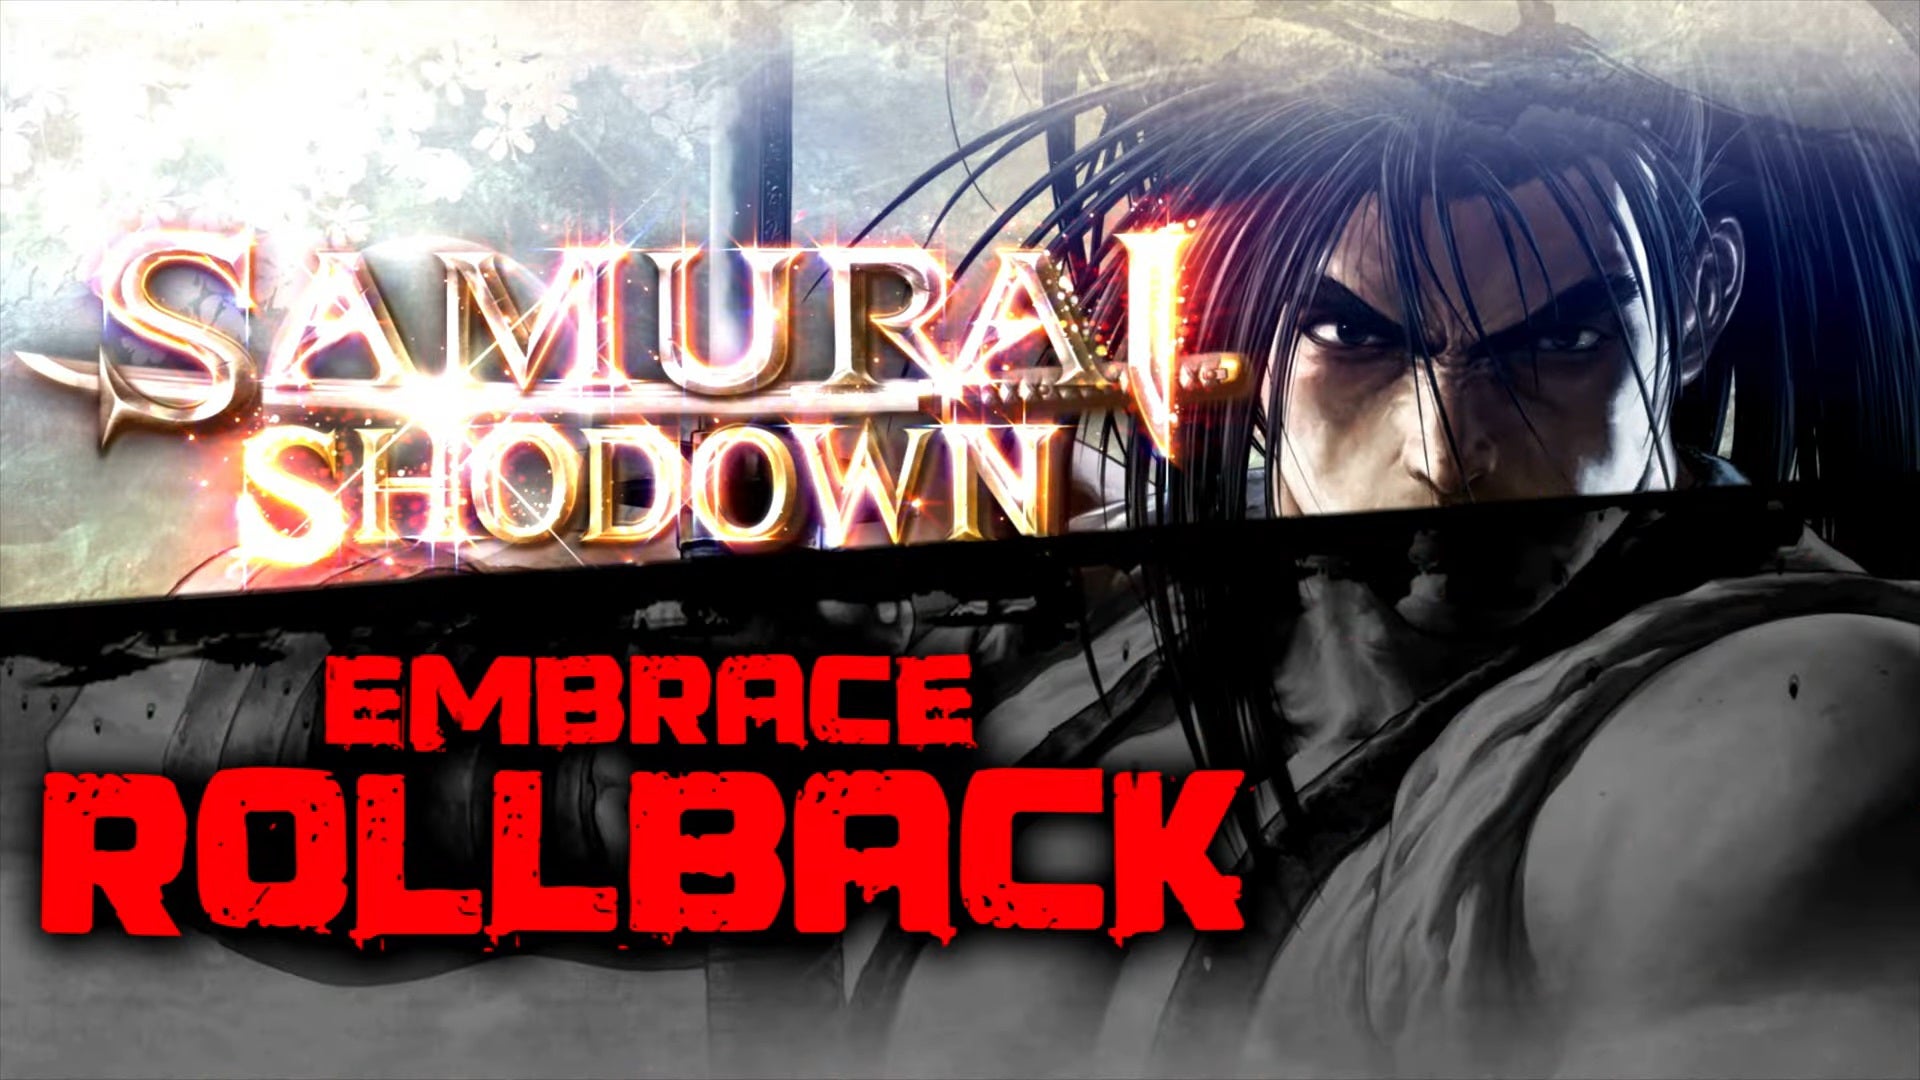 Screenshot from the Samurai Showdown Evo 2022 trailer with "embrace rollback" highlighted in red.